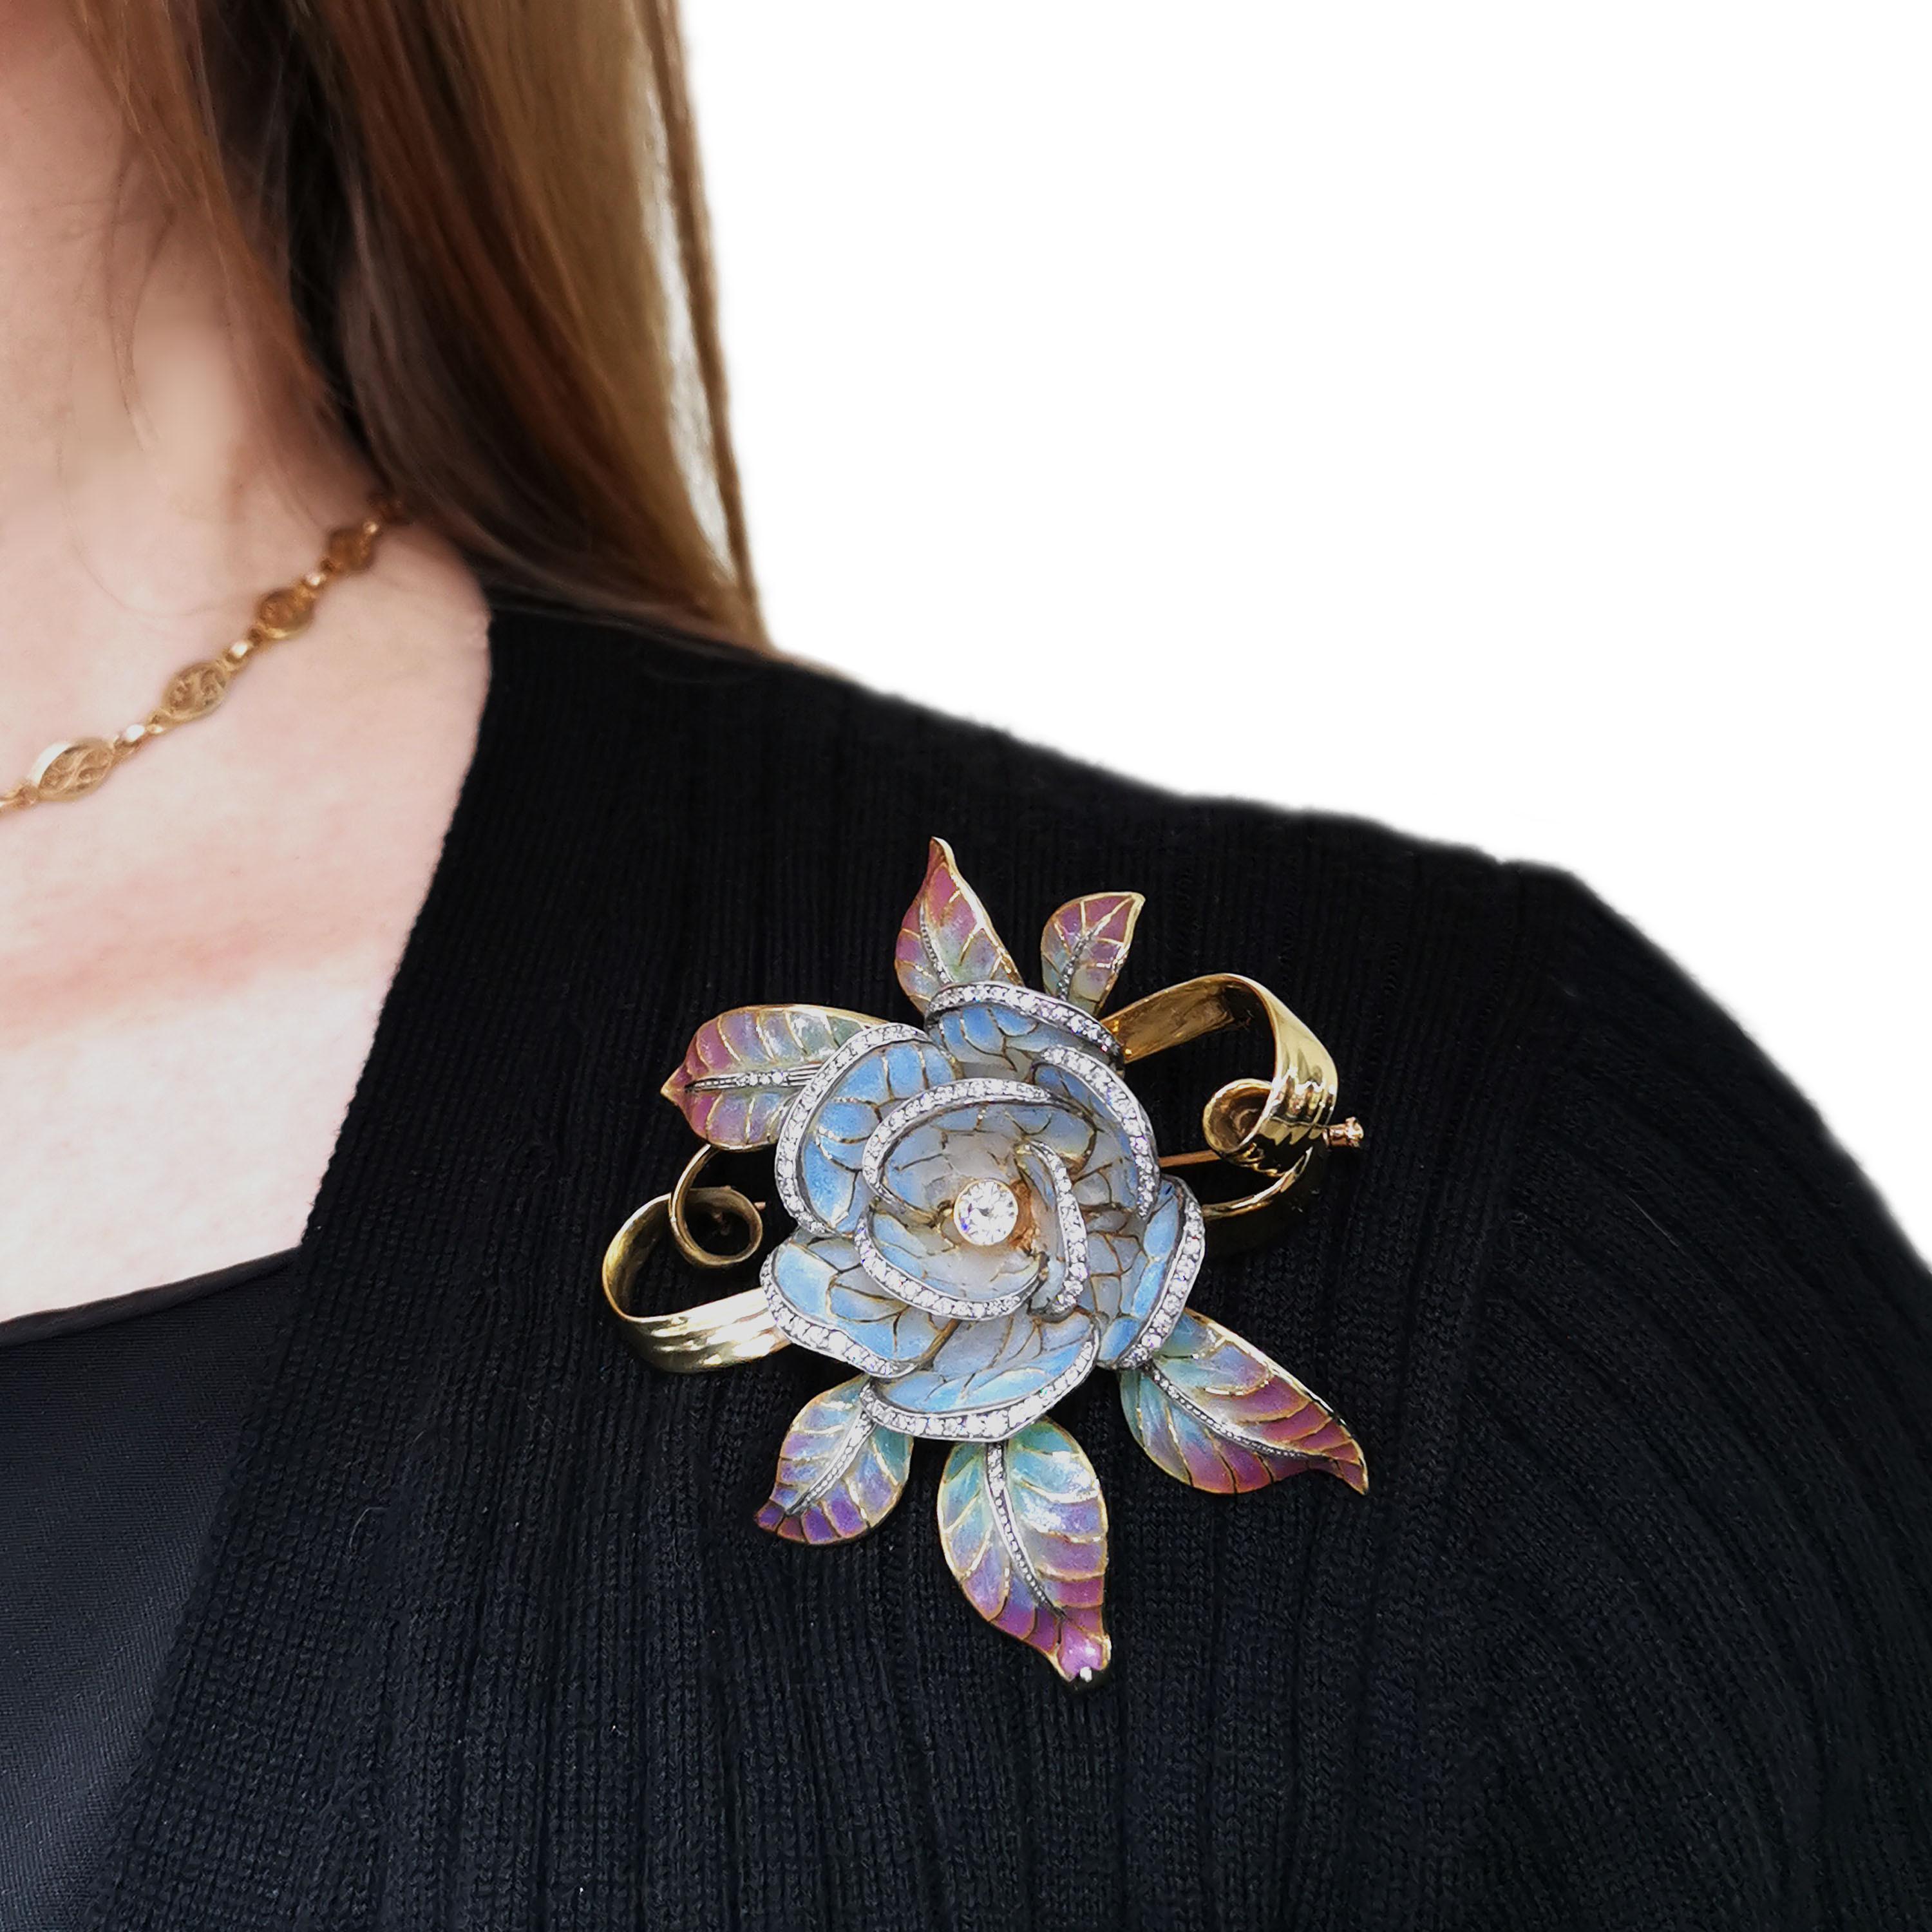 A Moira flower head brooch with blue, pink, green and white plique à jour enamel and diamonds, with a rub over set round brilliant-cut diamond in the centre of a shaded blue to white plique à jour enamel flower, with eight-cut diamonds pavé set in